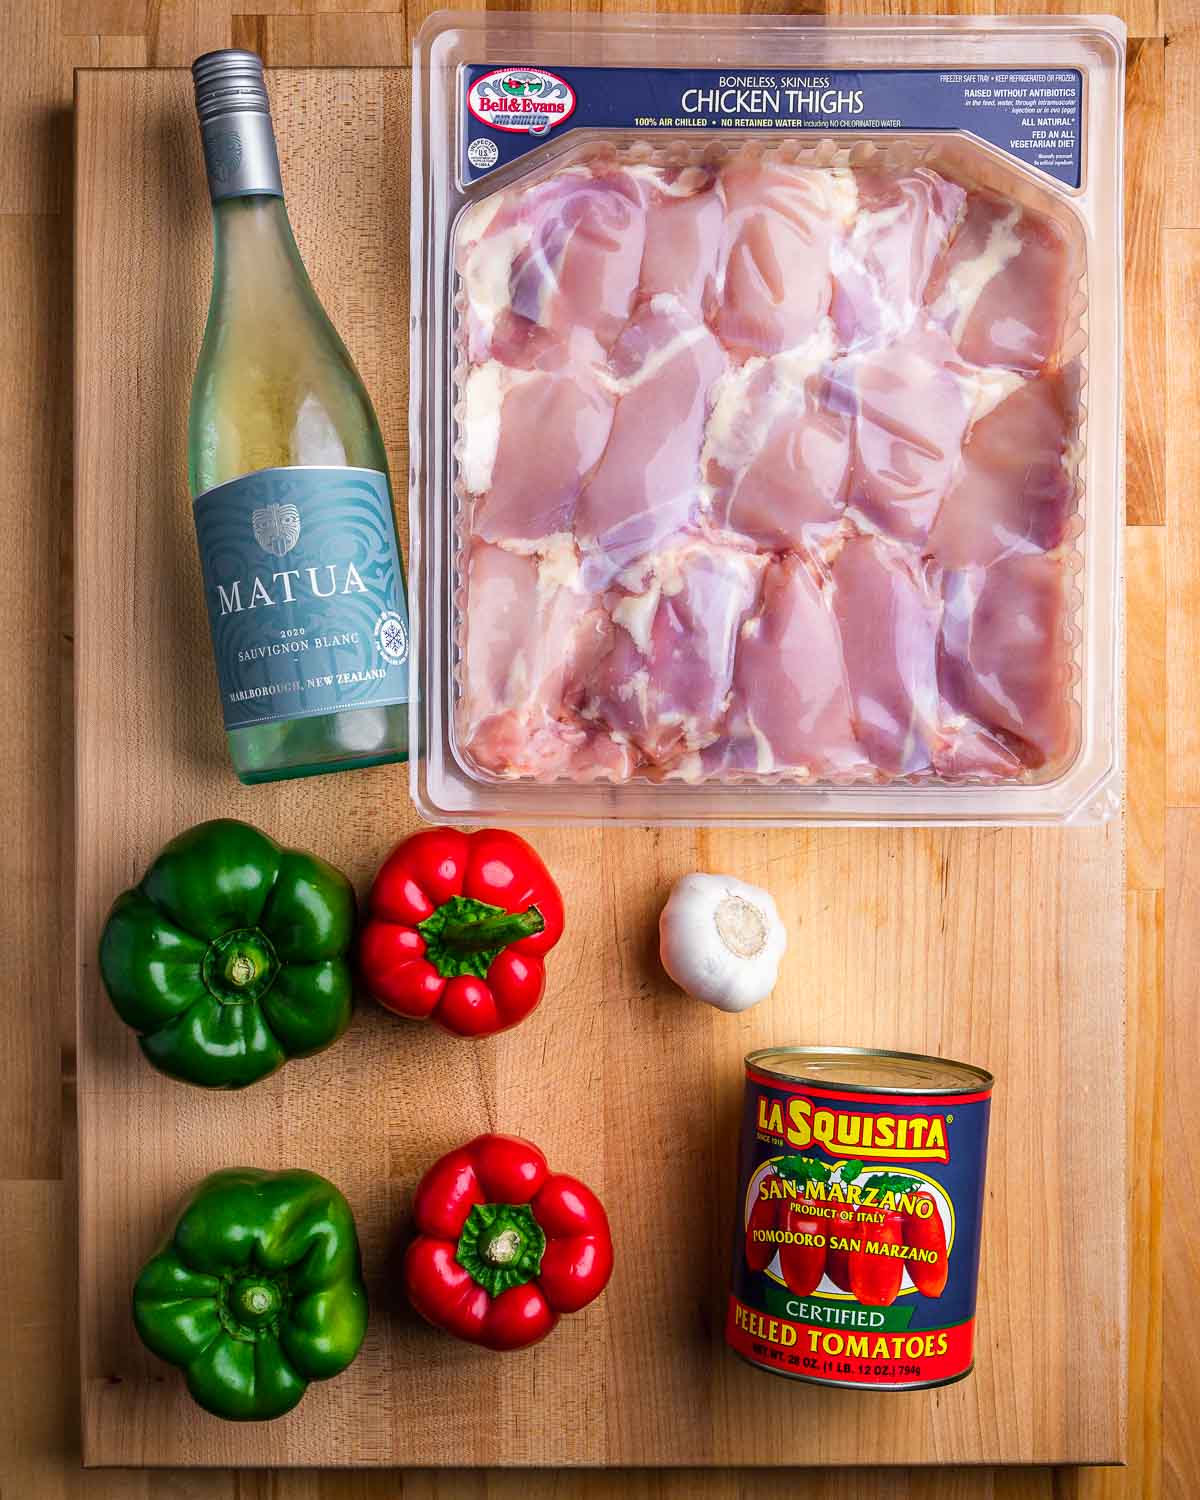 Ingredients shown: white wine, chicken thighs, bell peppers, garlic, and plum tomatoes.